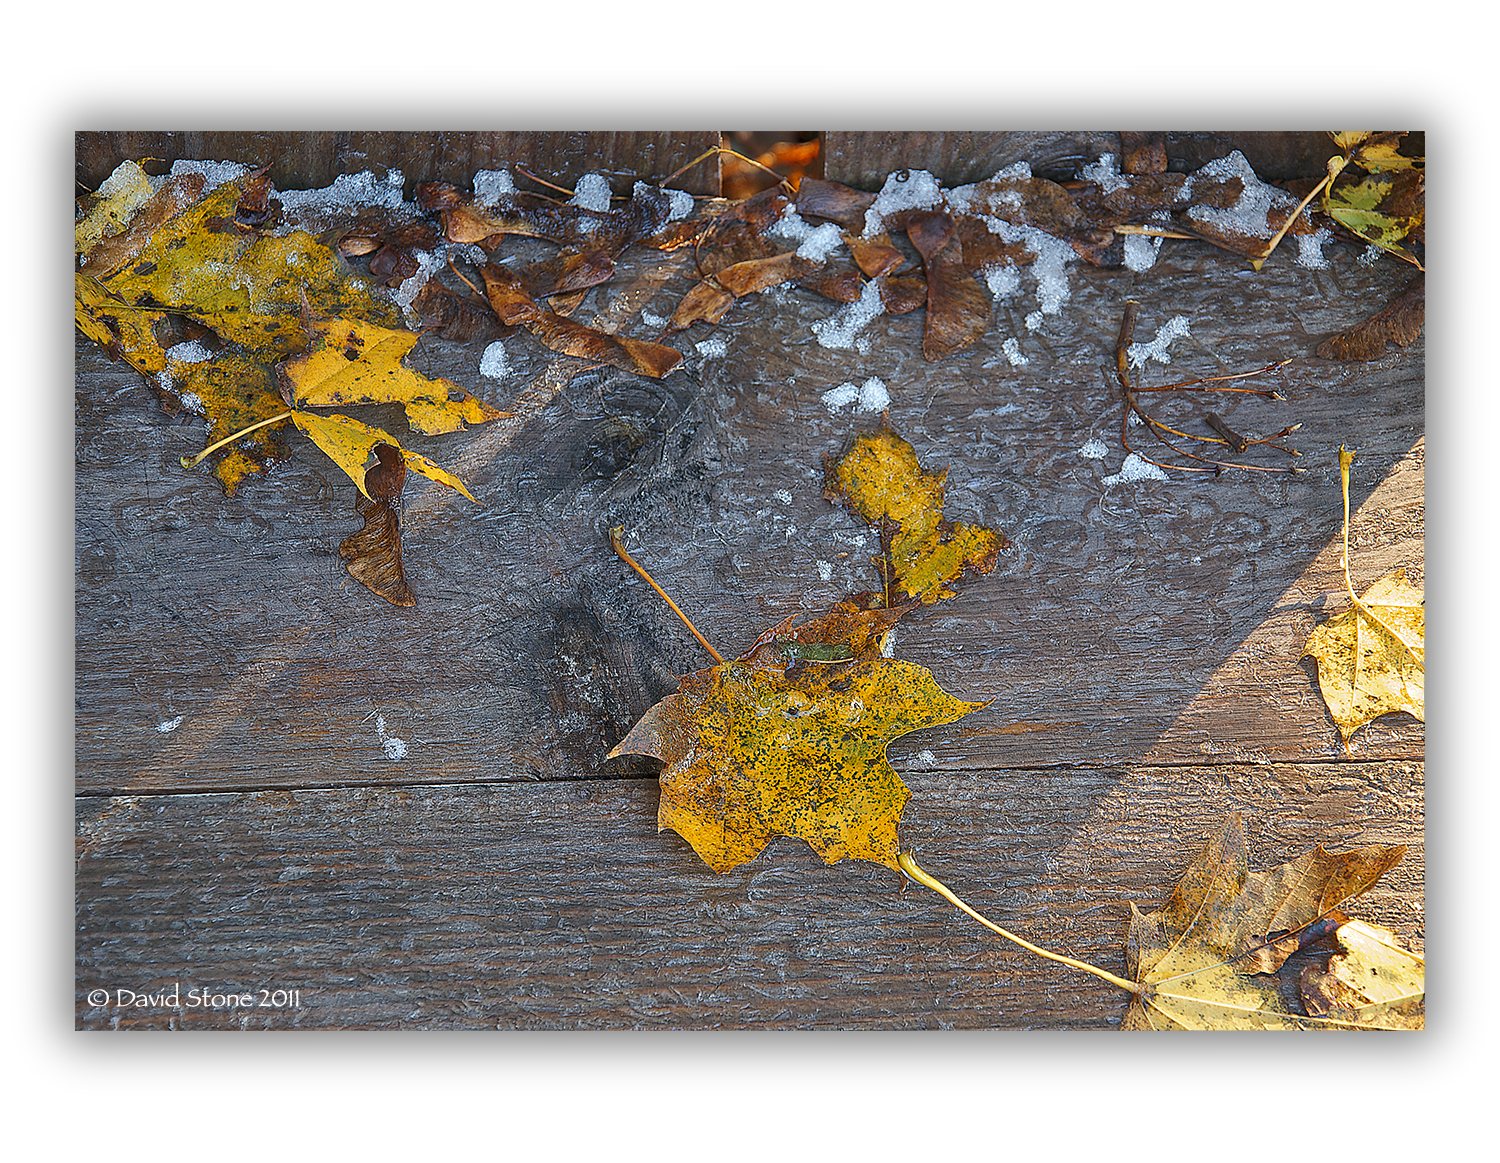 Leaves And Morning Ice On An Adirondack Chair (user submitted)